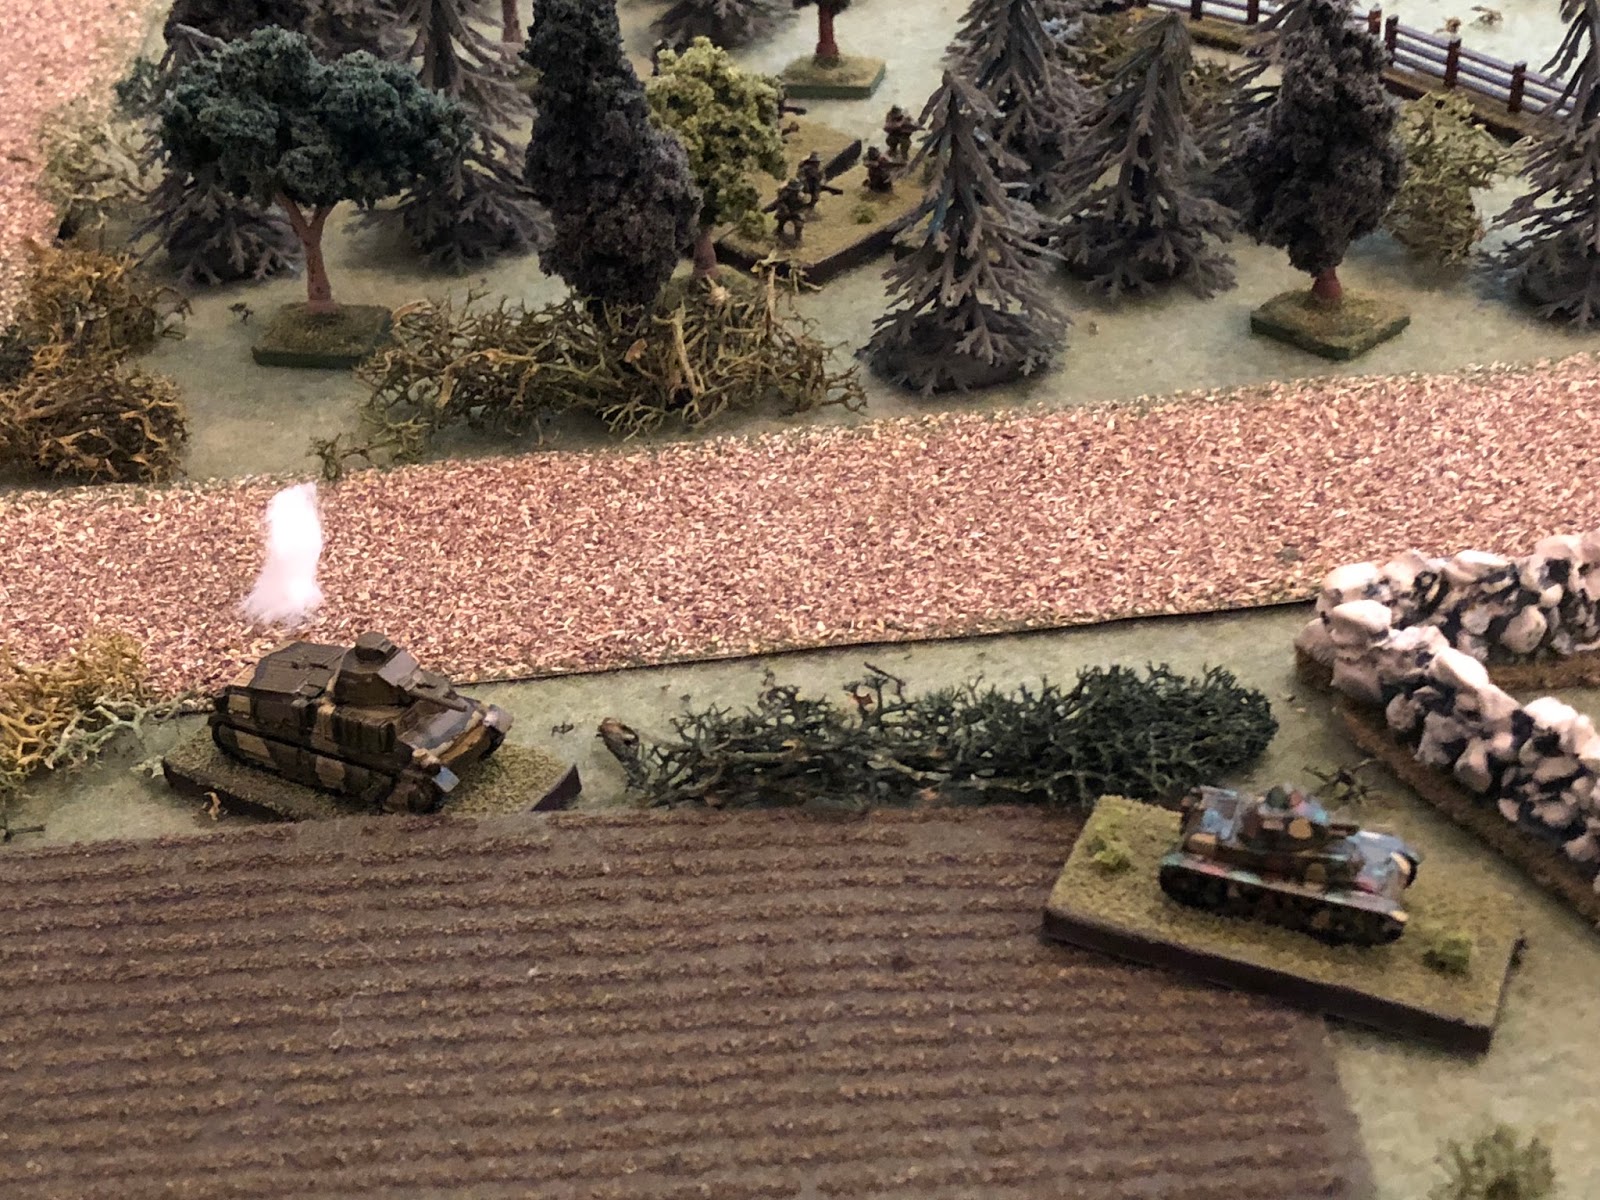  Just missing the southern Somua (left)...&nbsp; The H39 commander (bottom right) looks on anxiously, and the French 2nd Platoon (top center) decides it's maybe not so bad being totally ensconced in the woods.   